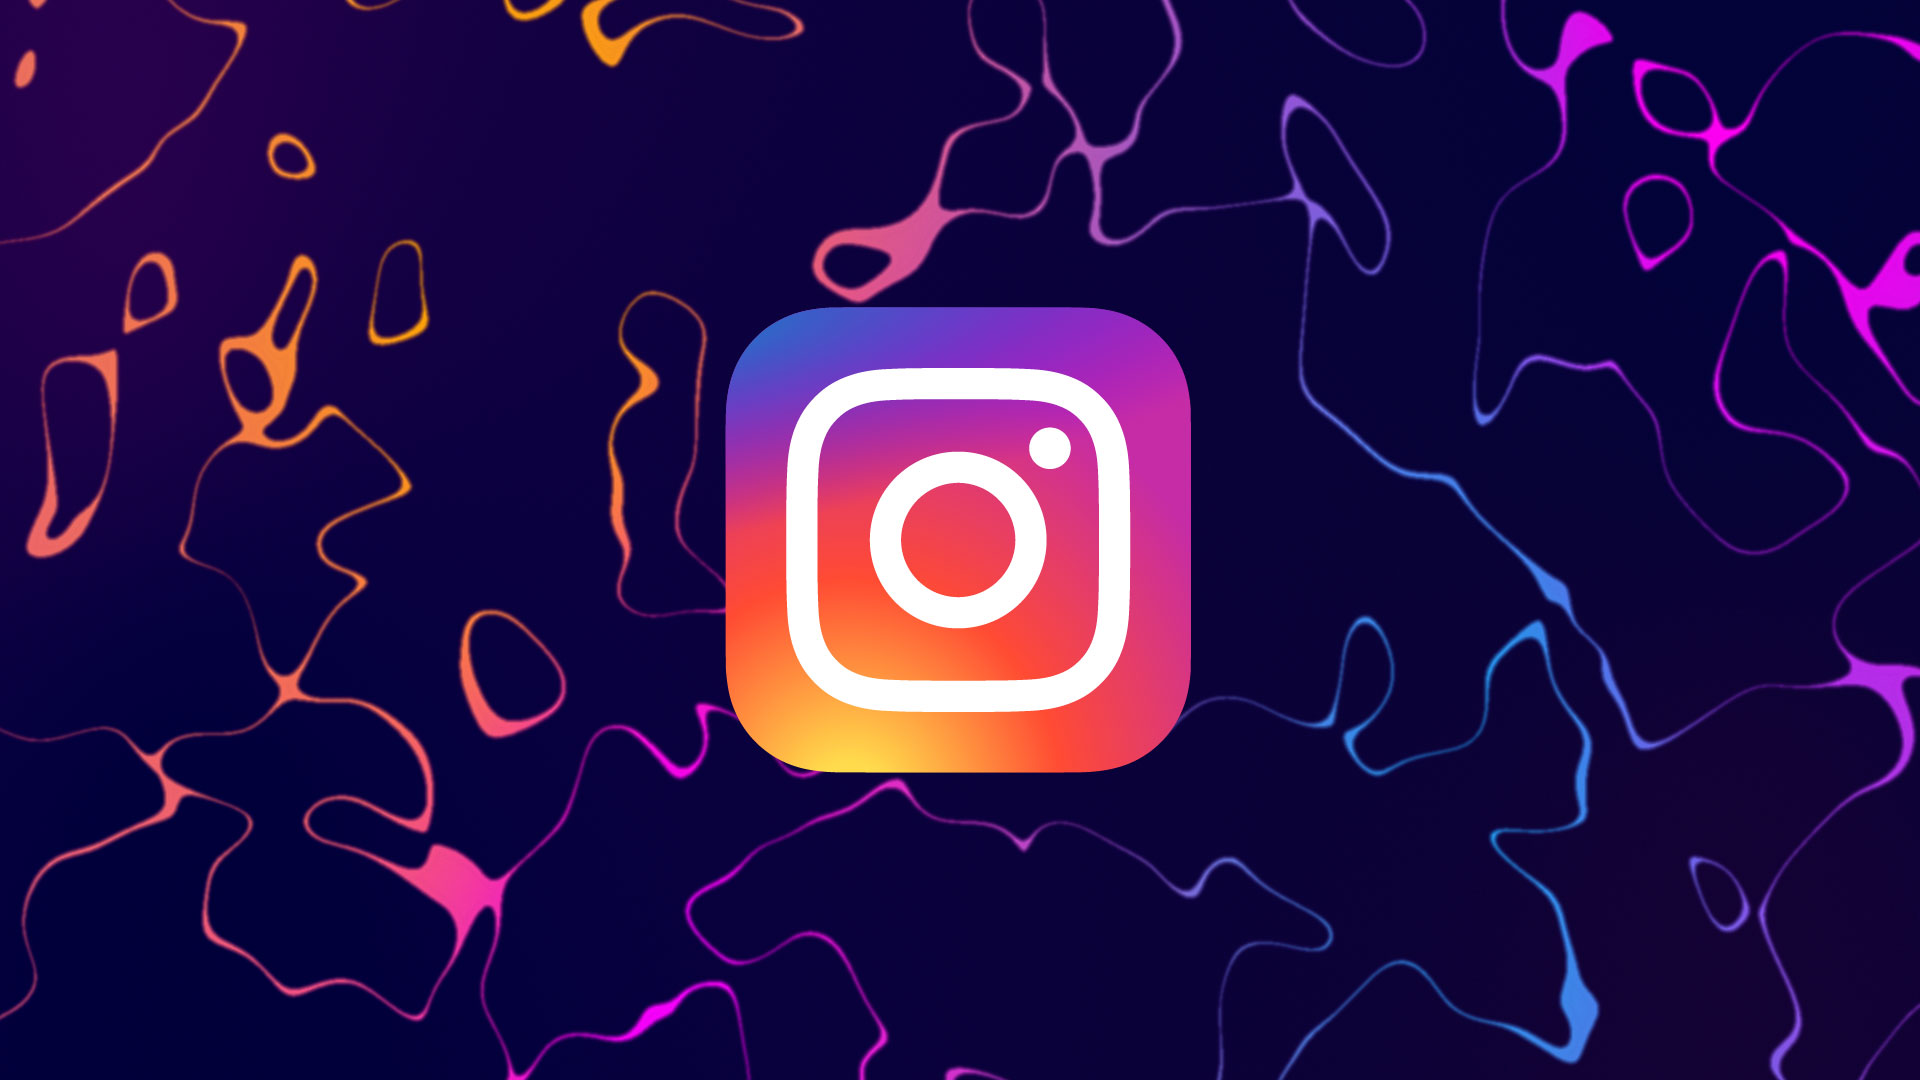 10 Methods to Get UK Instagram Followers for Your Business